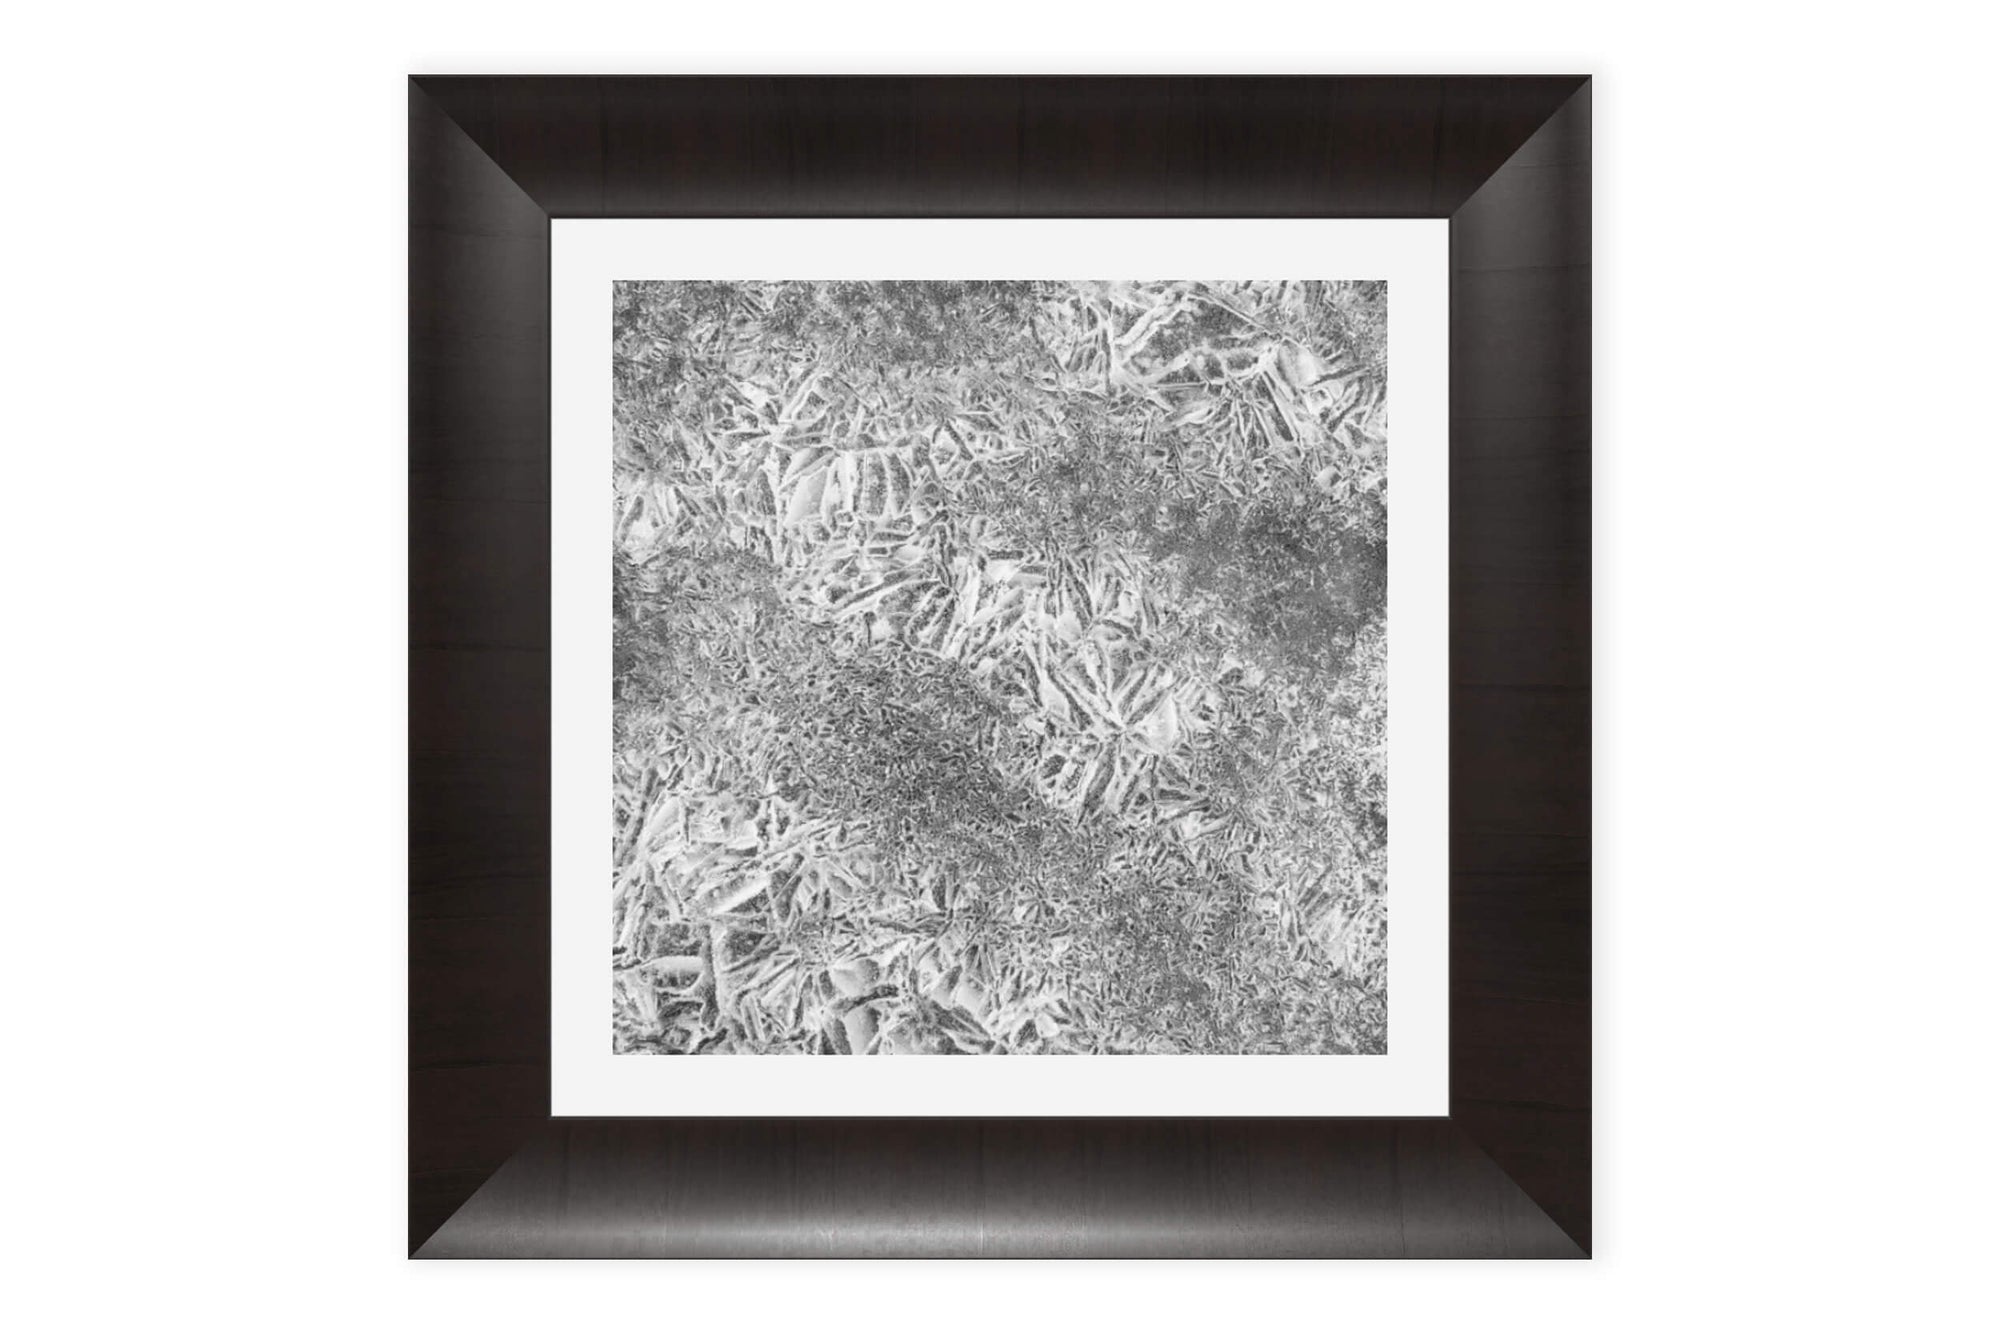 A framed abstract photograph of Dream Lake in Rocky Mountain National Park.